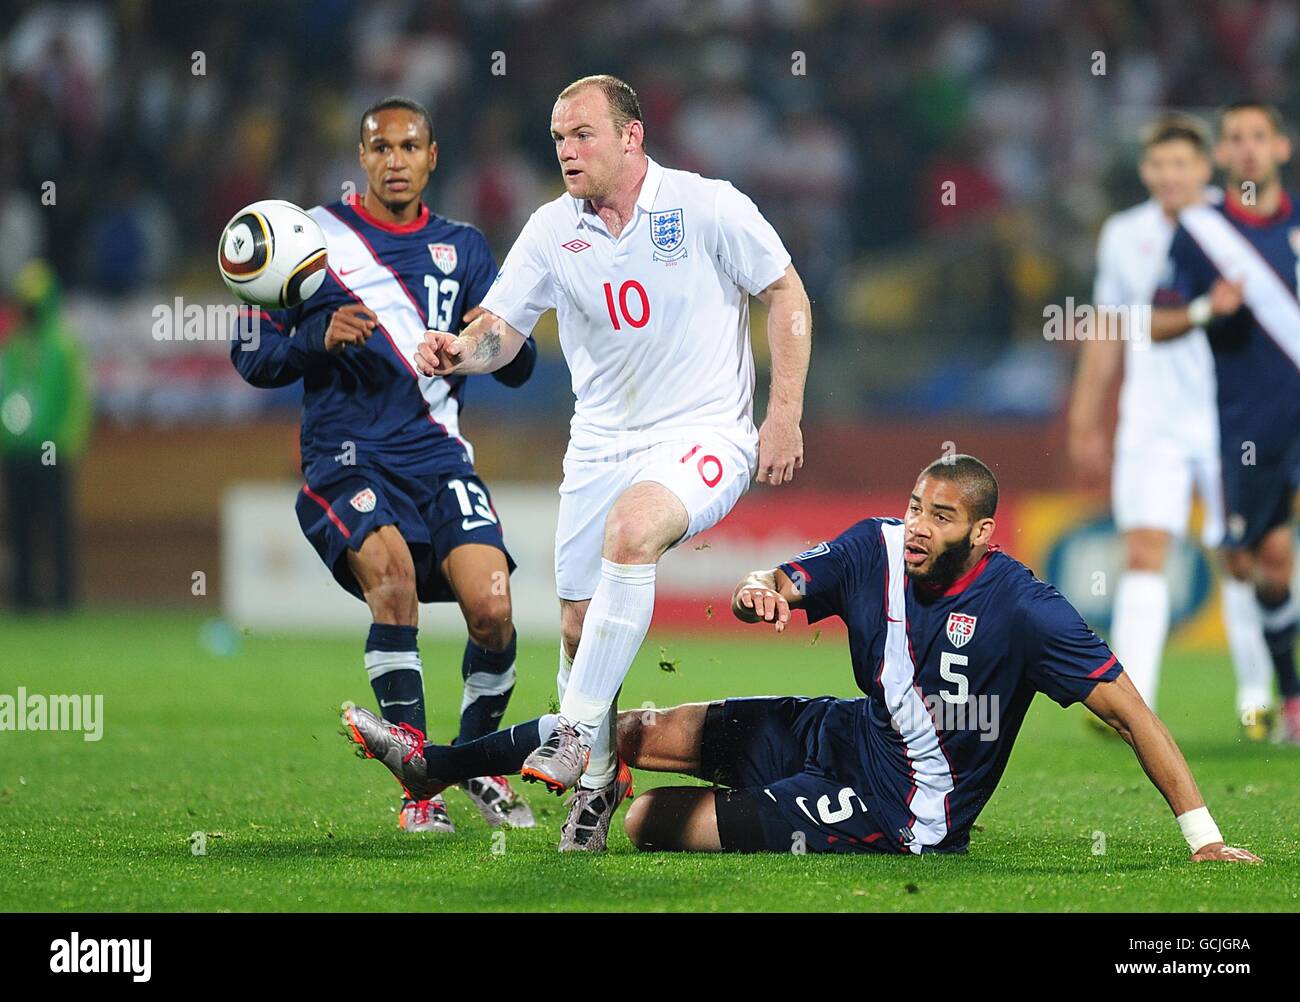 Soccer - 2010 FIFA World Cup South Africa - Group C - England v USA - Royal Bafokeng Stadium. England's Wayne Rooney (centre) is challenged by USA's Oguchi Onyewu (right) for the ball Stock Photo